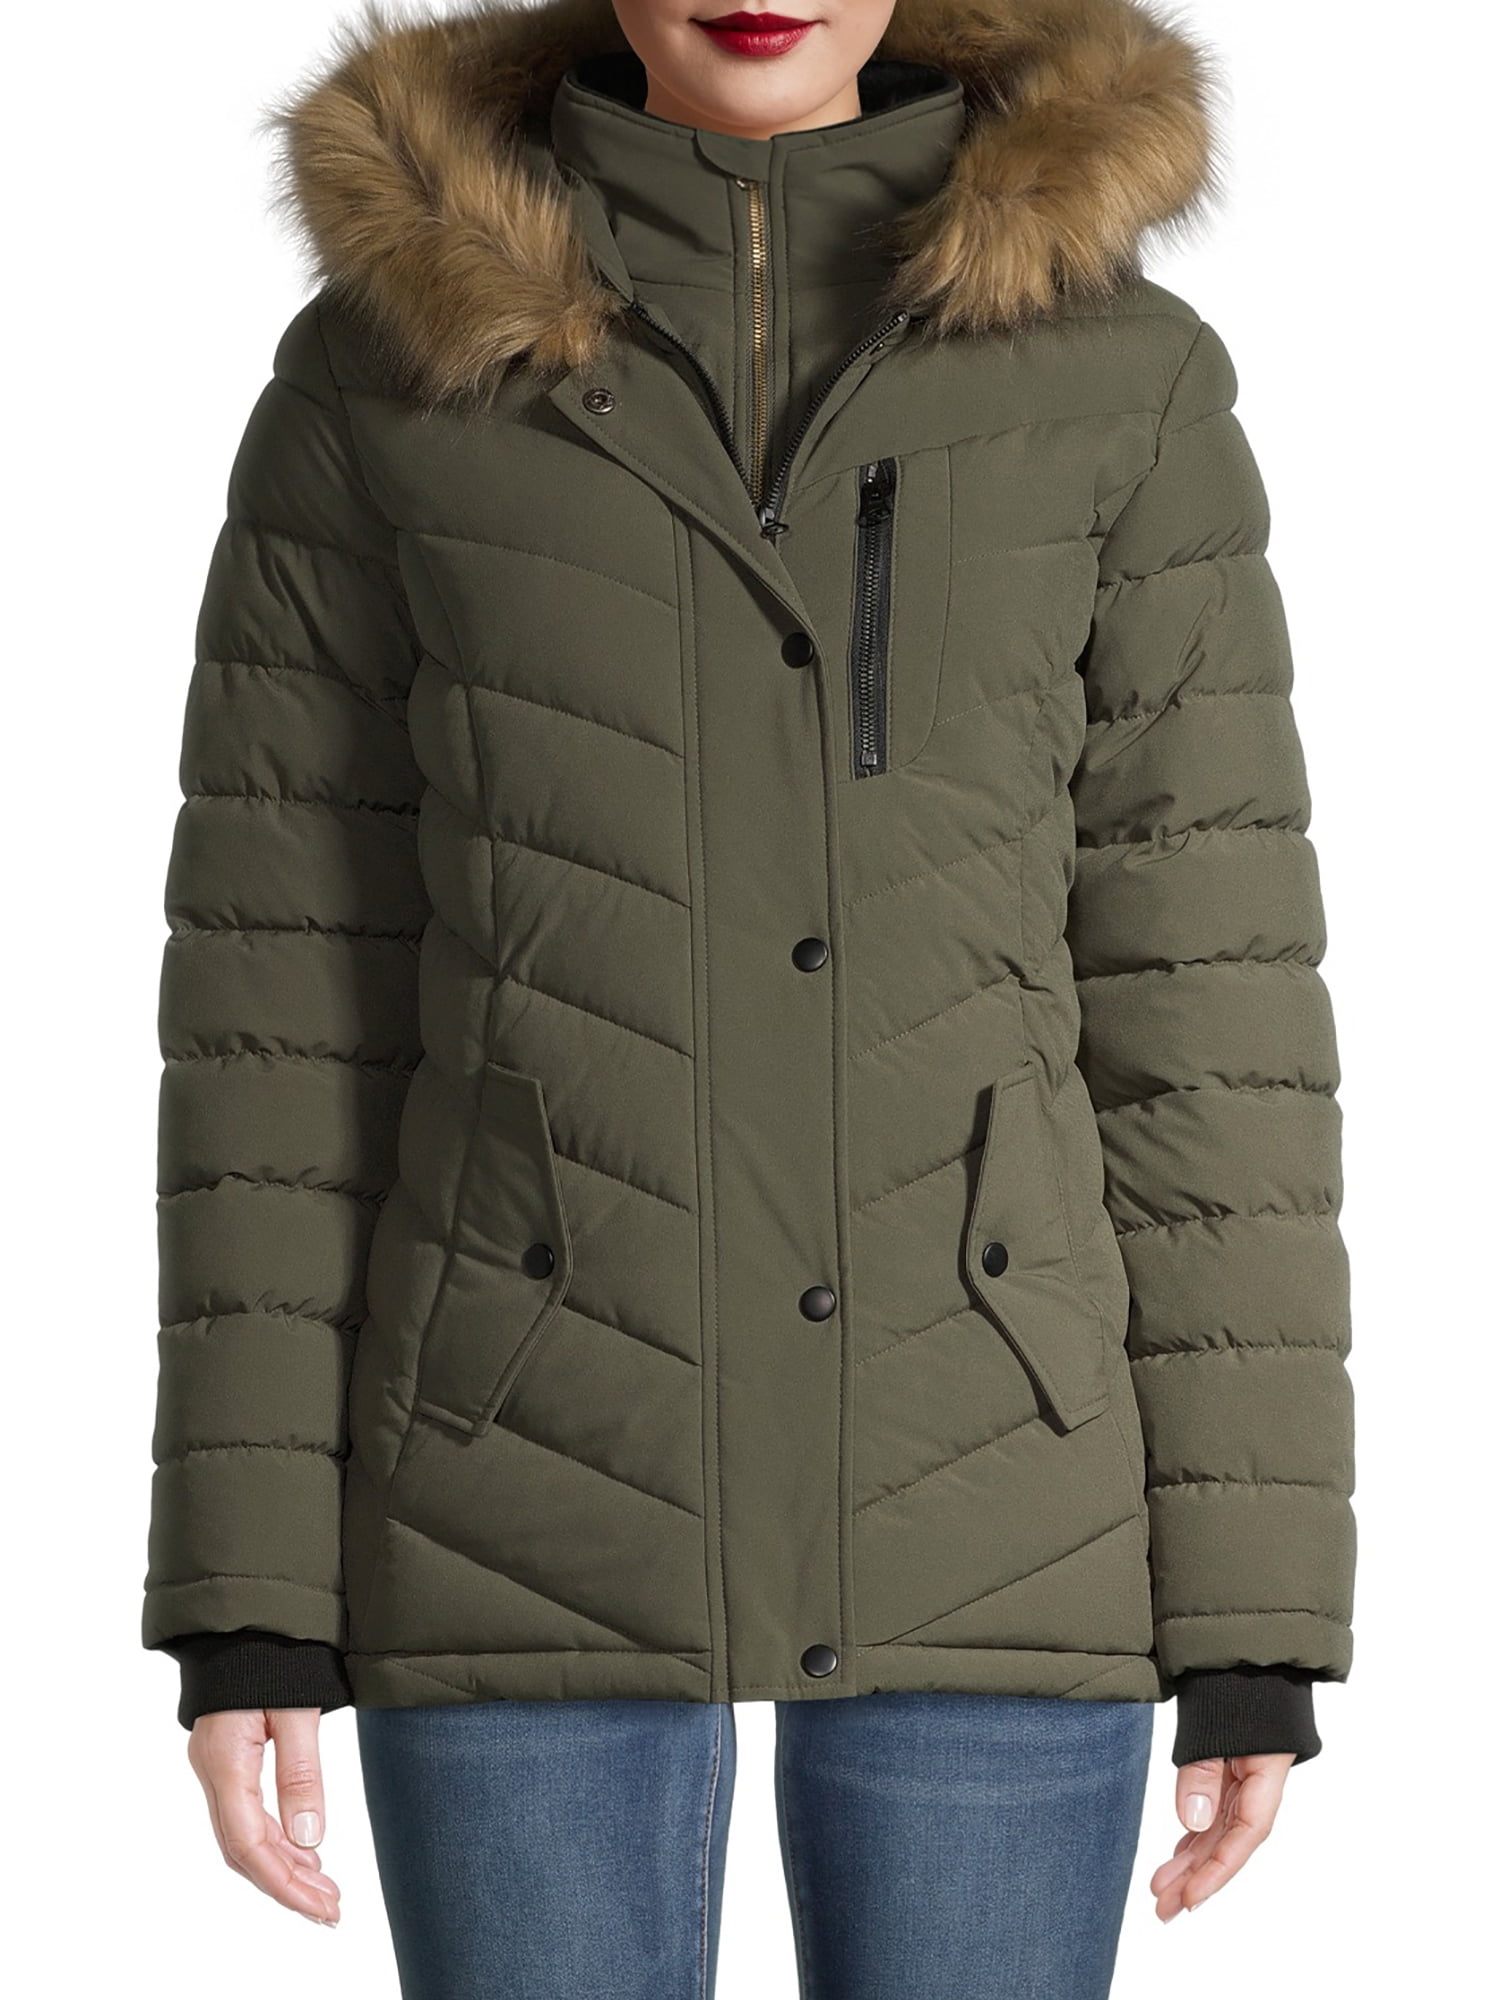 Swiss Tech Women's Bibbed Solarball Puffer Coat with Faux Fur Trimmed ...